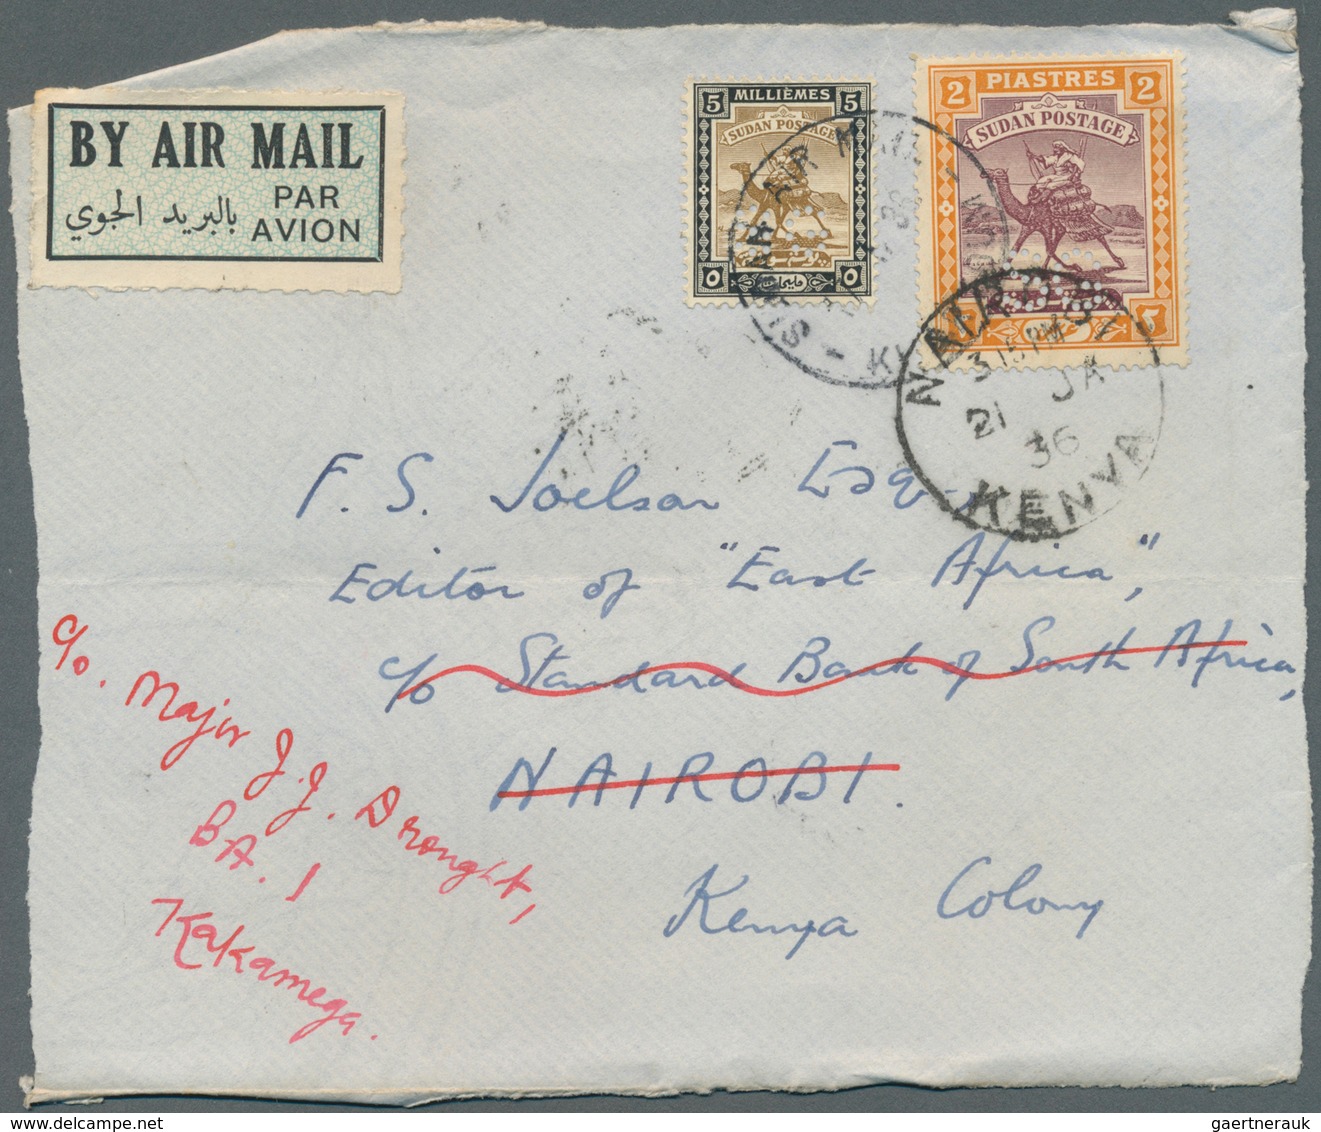 24108 Sudan - Dienstmarken Regierung: 1936/49, airmail covers to London franked up to 10 Sh (5), plus fron